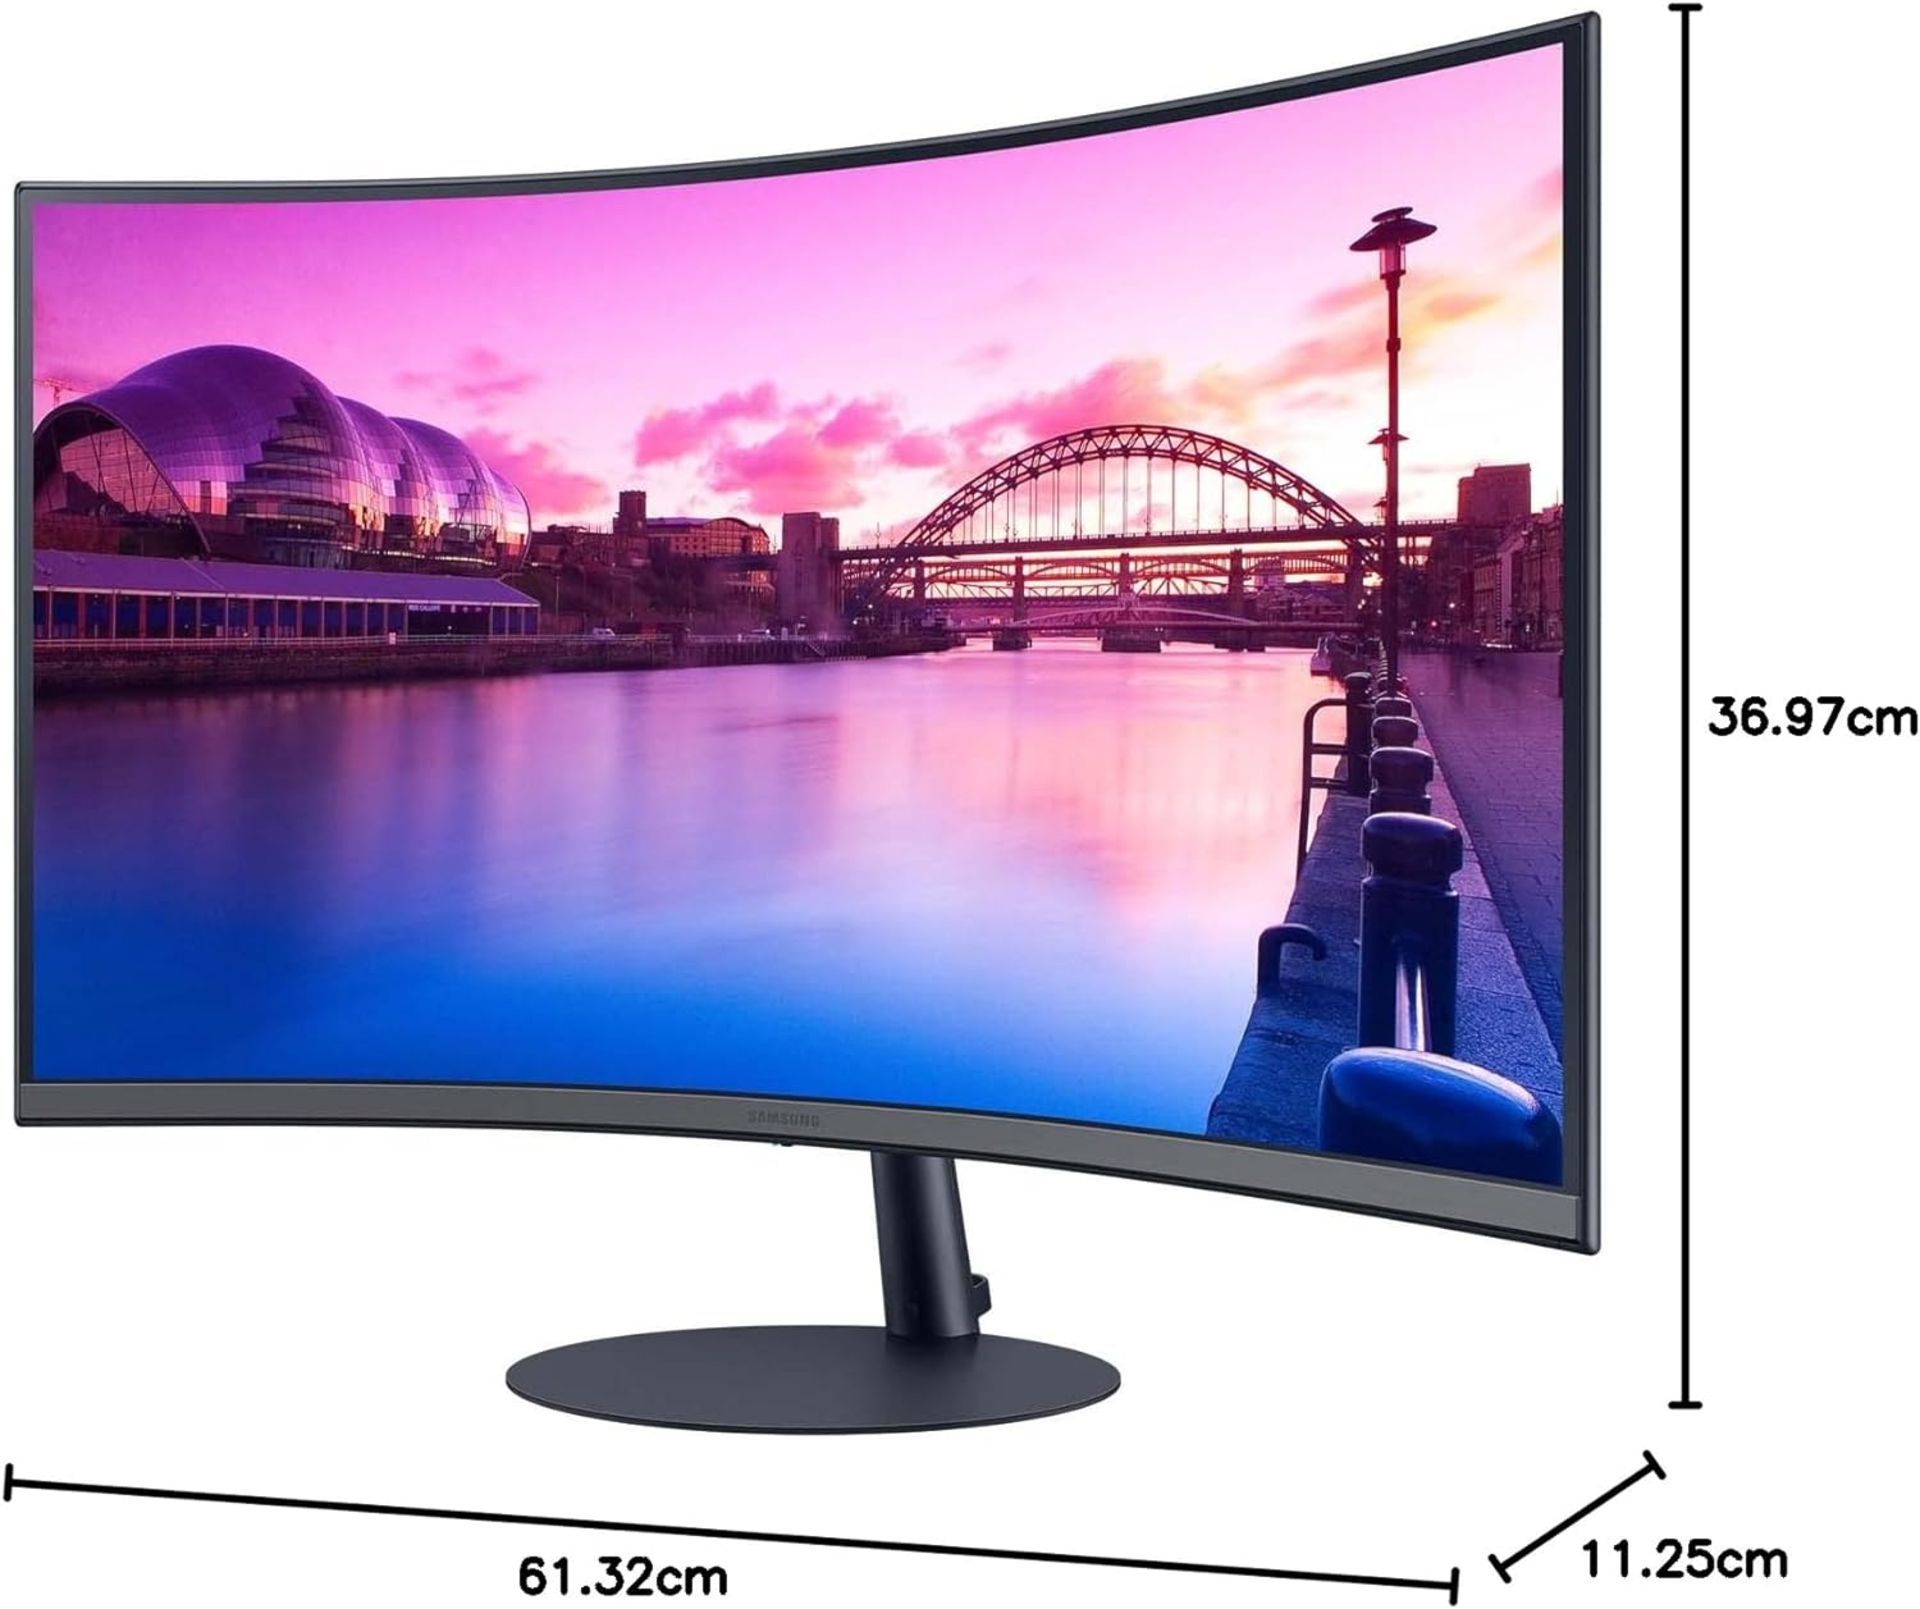 NEW & BOXED SAMSUNG S27C390EAU 27 Inch 75Hz Curved FHD Monitor. RRP £199. (R15). 27in LED display. - Image 5 of 8